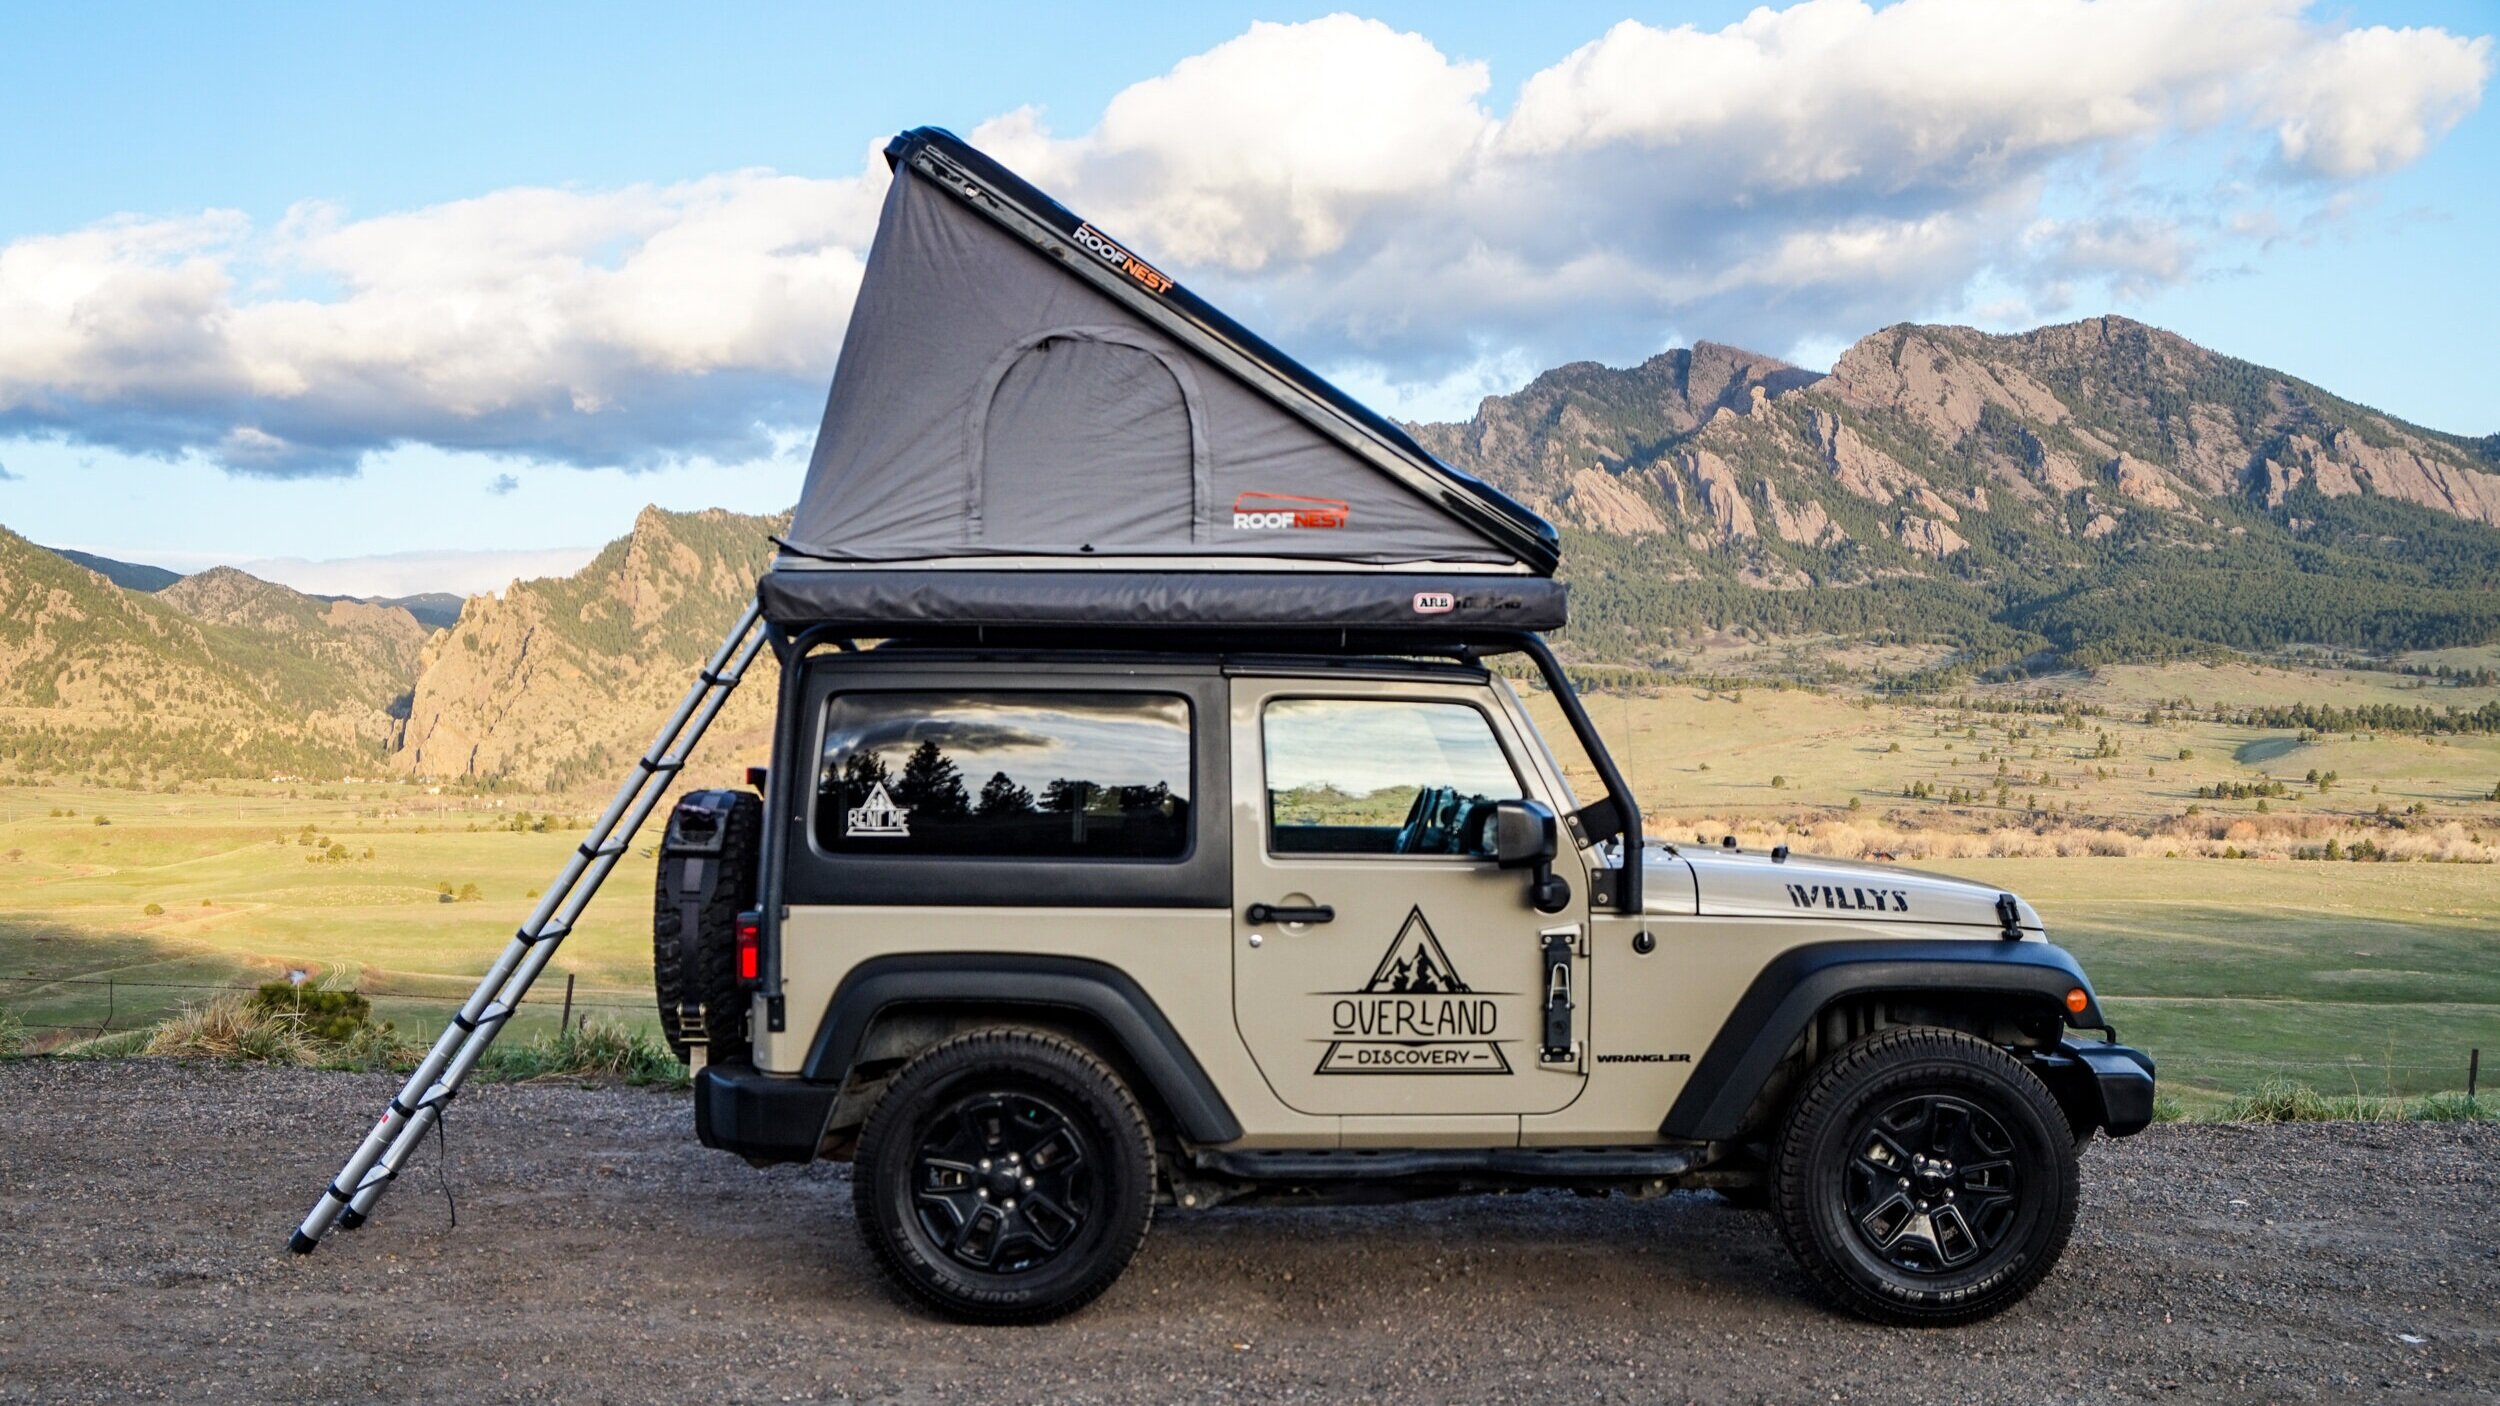 jeep tent OFF 67% Online Shopping Site for Fashion & Lifestyle.